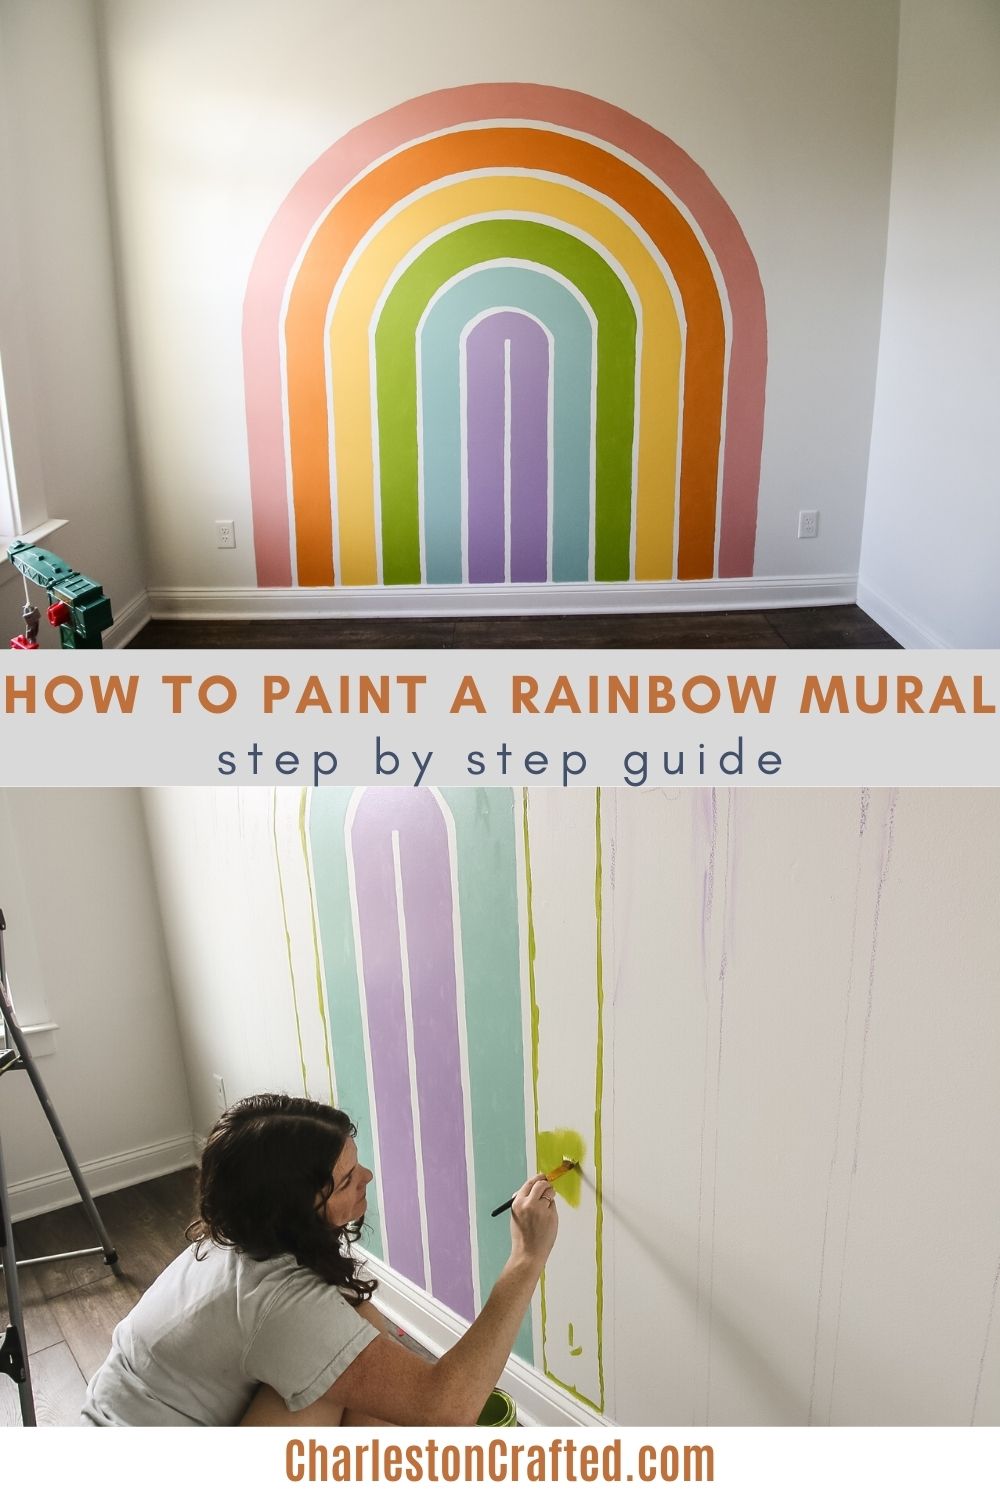 How to Use Acrylic Paint on a Walls? Step by Step Guide